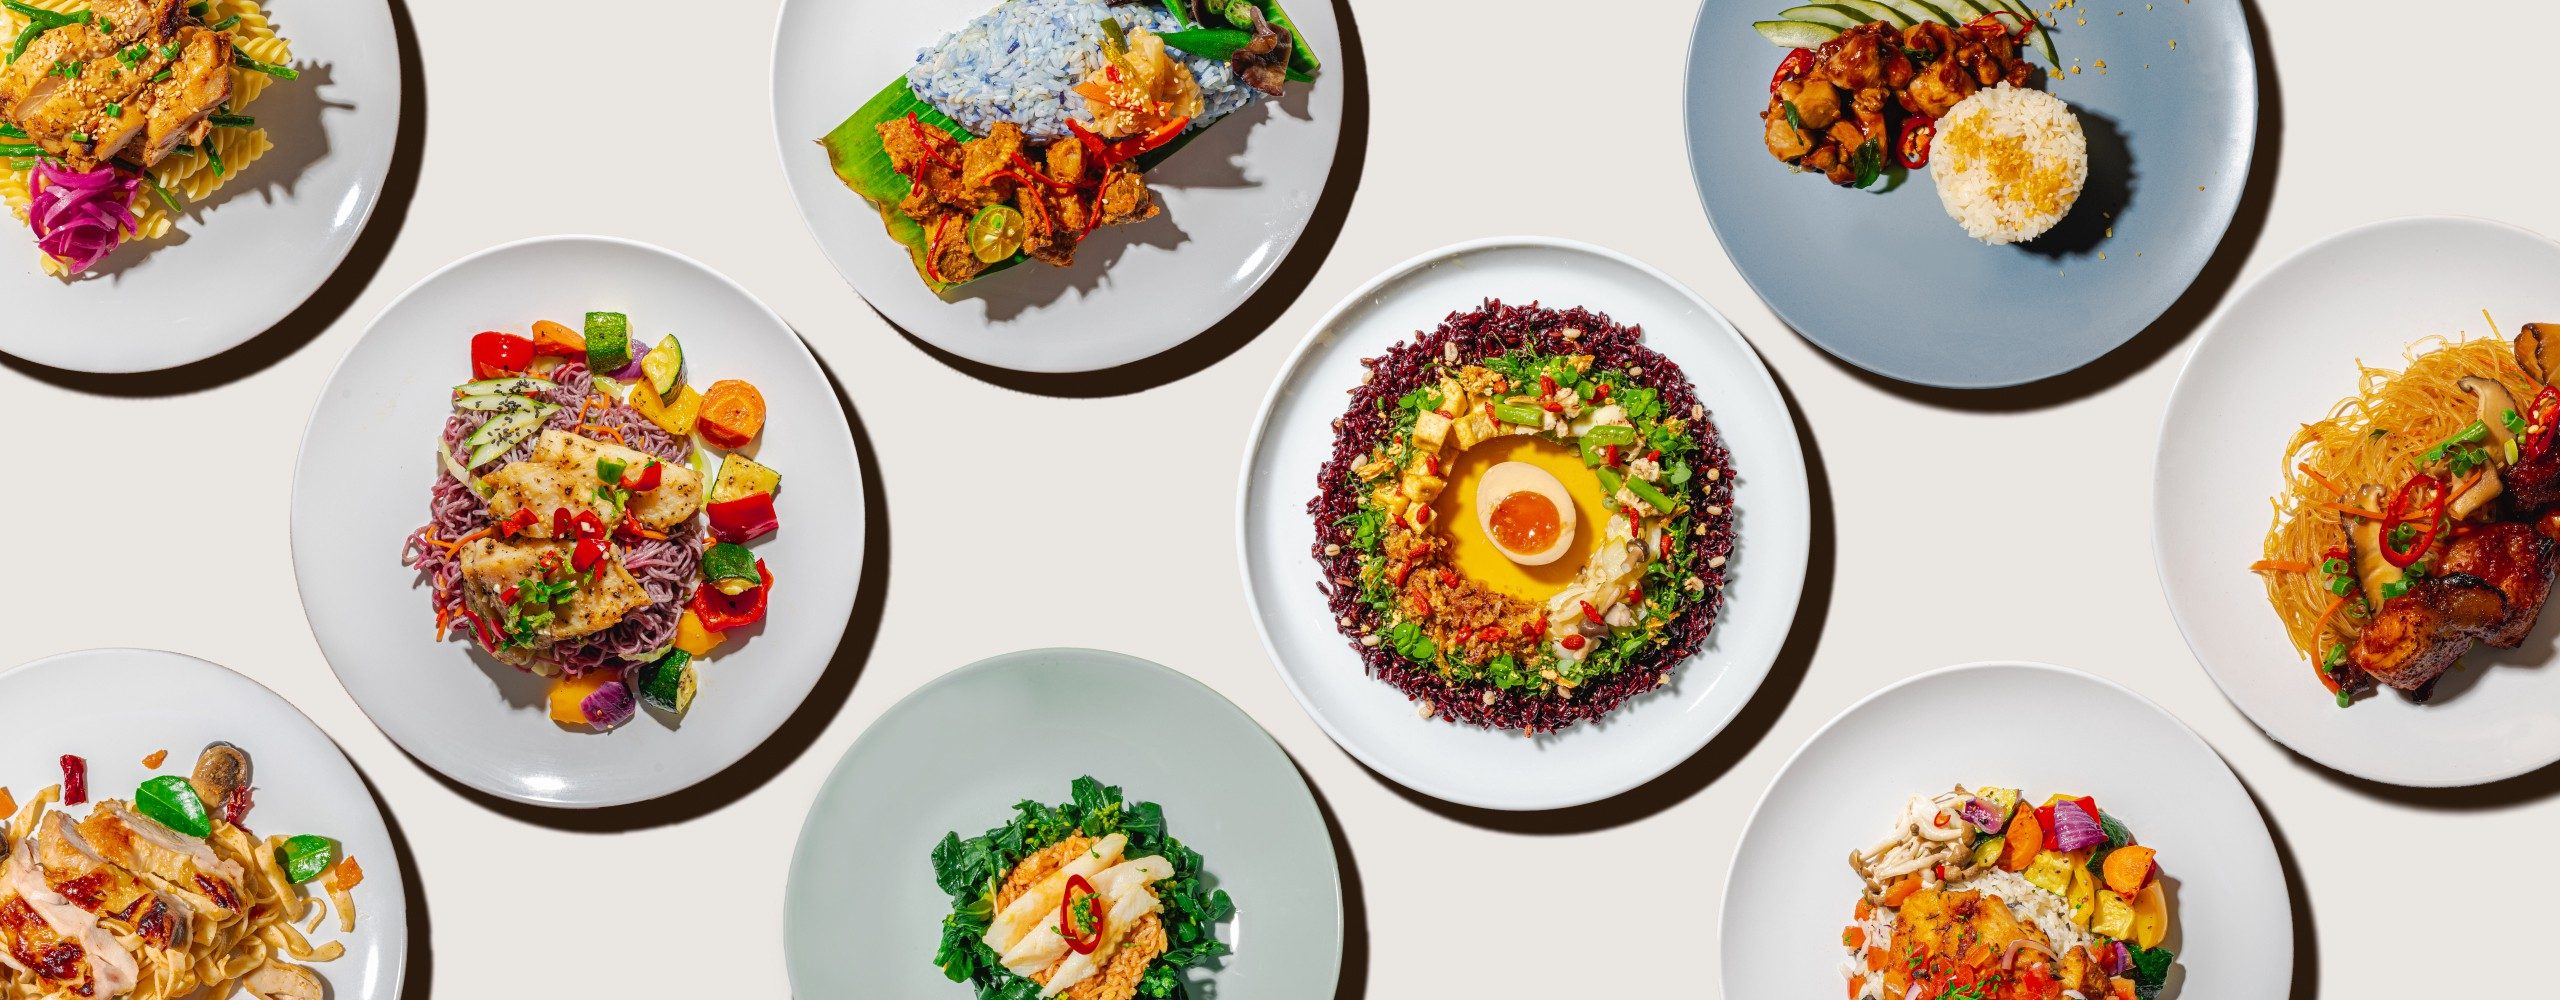 Singapore cloud kitchen Grain raising funds led by hospitality major Lo and Behold